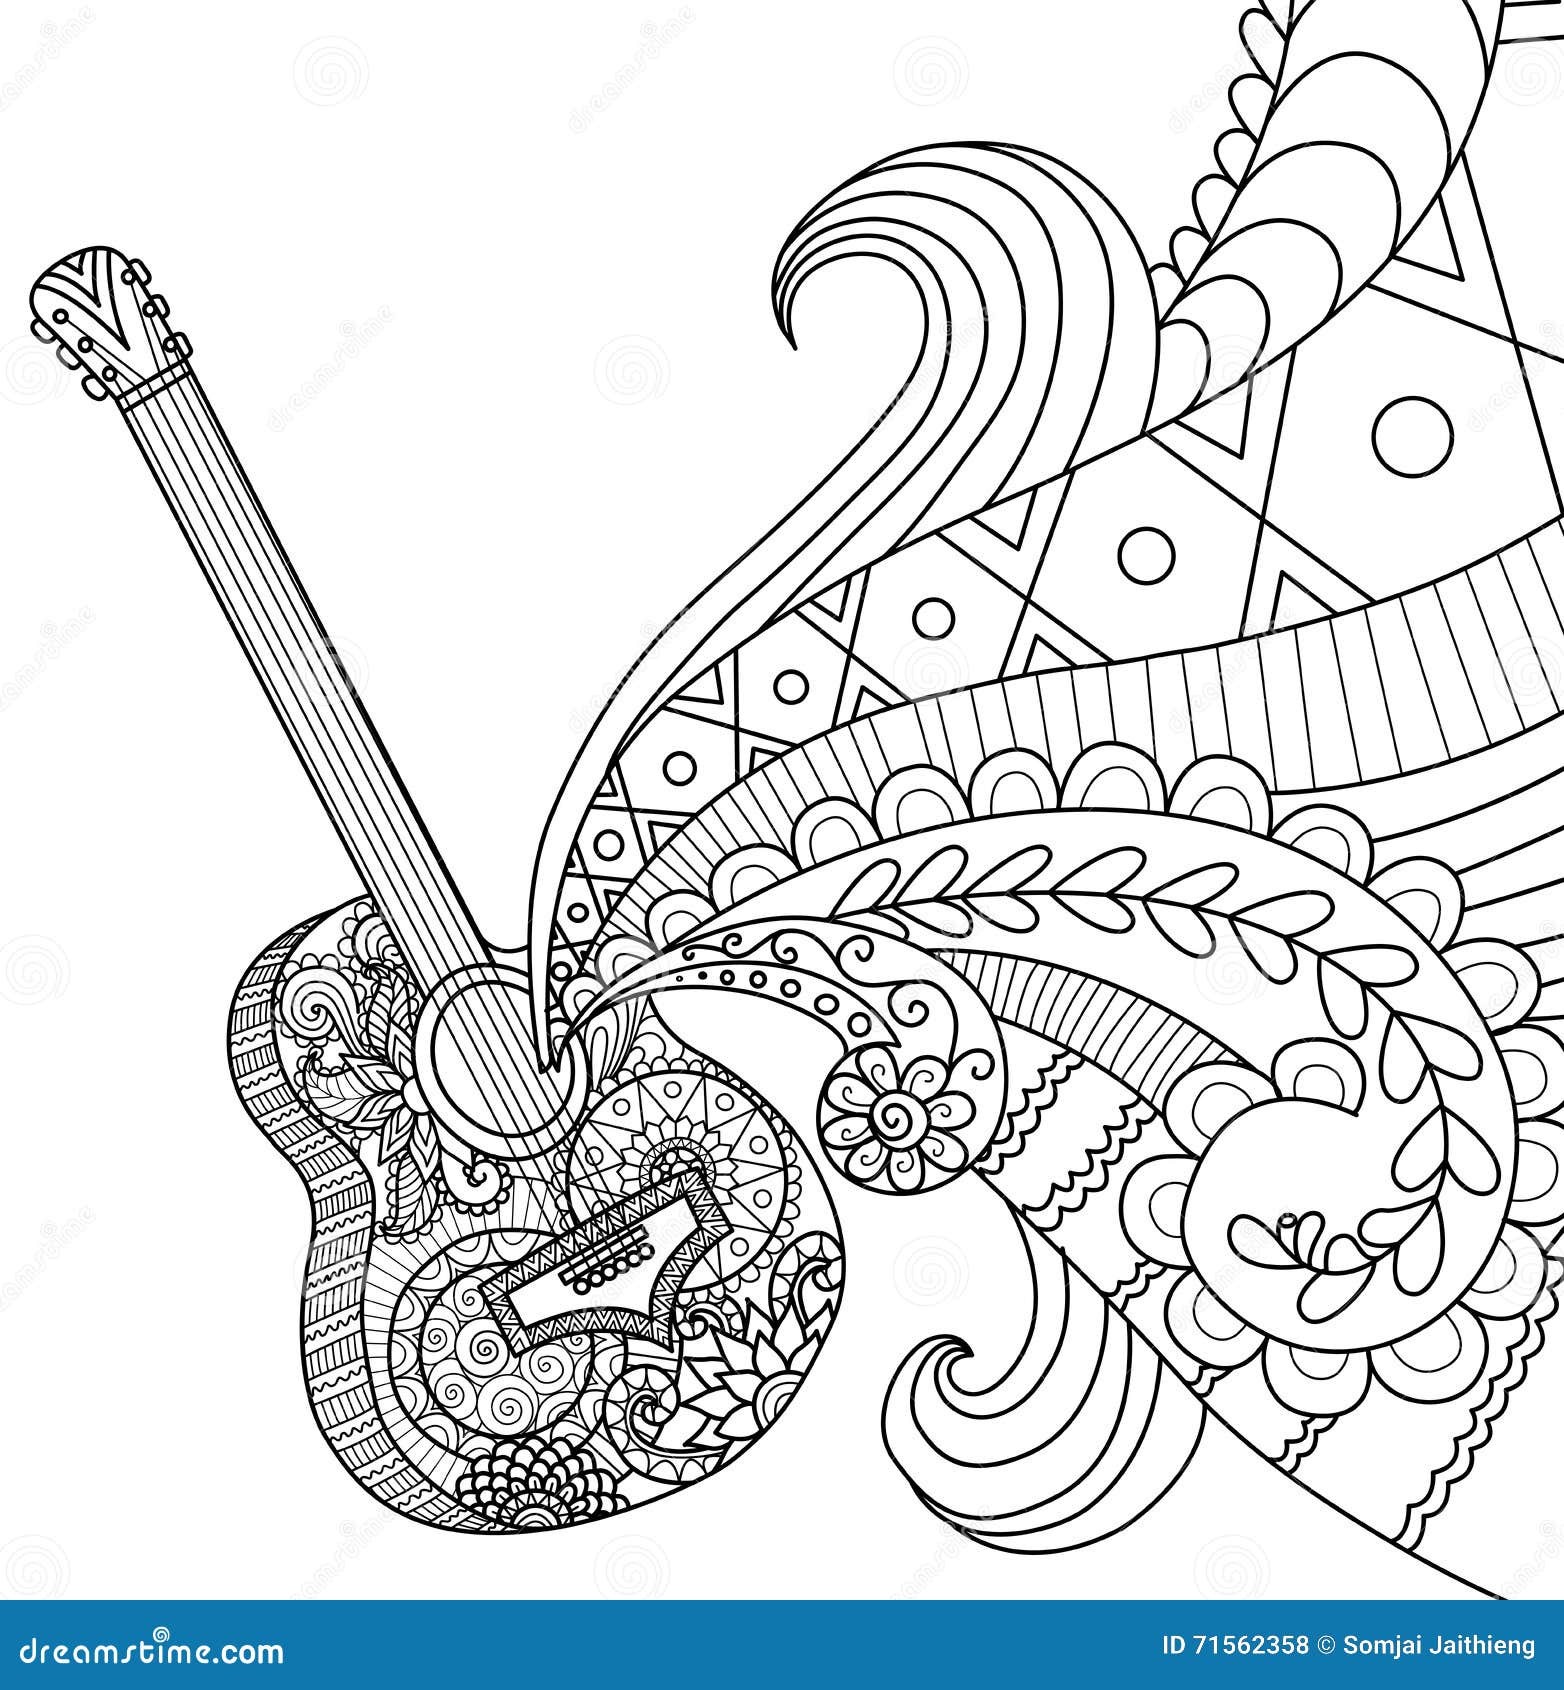 Doodles design of guitar for coloring book for adult stock vector